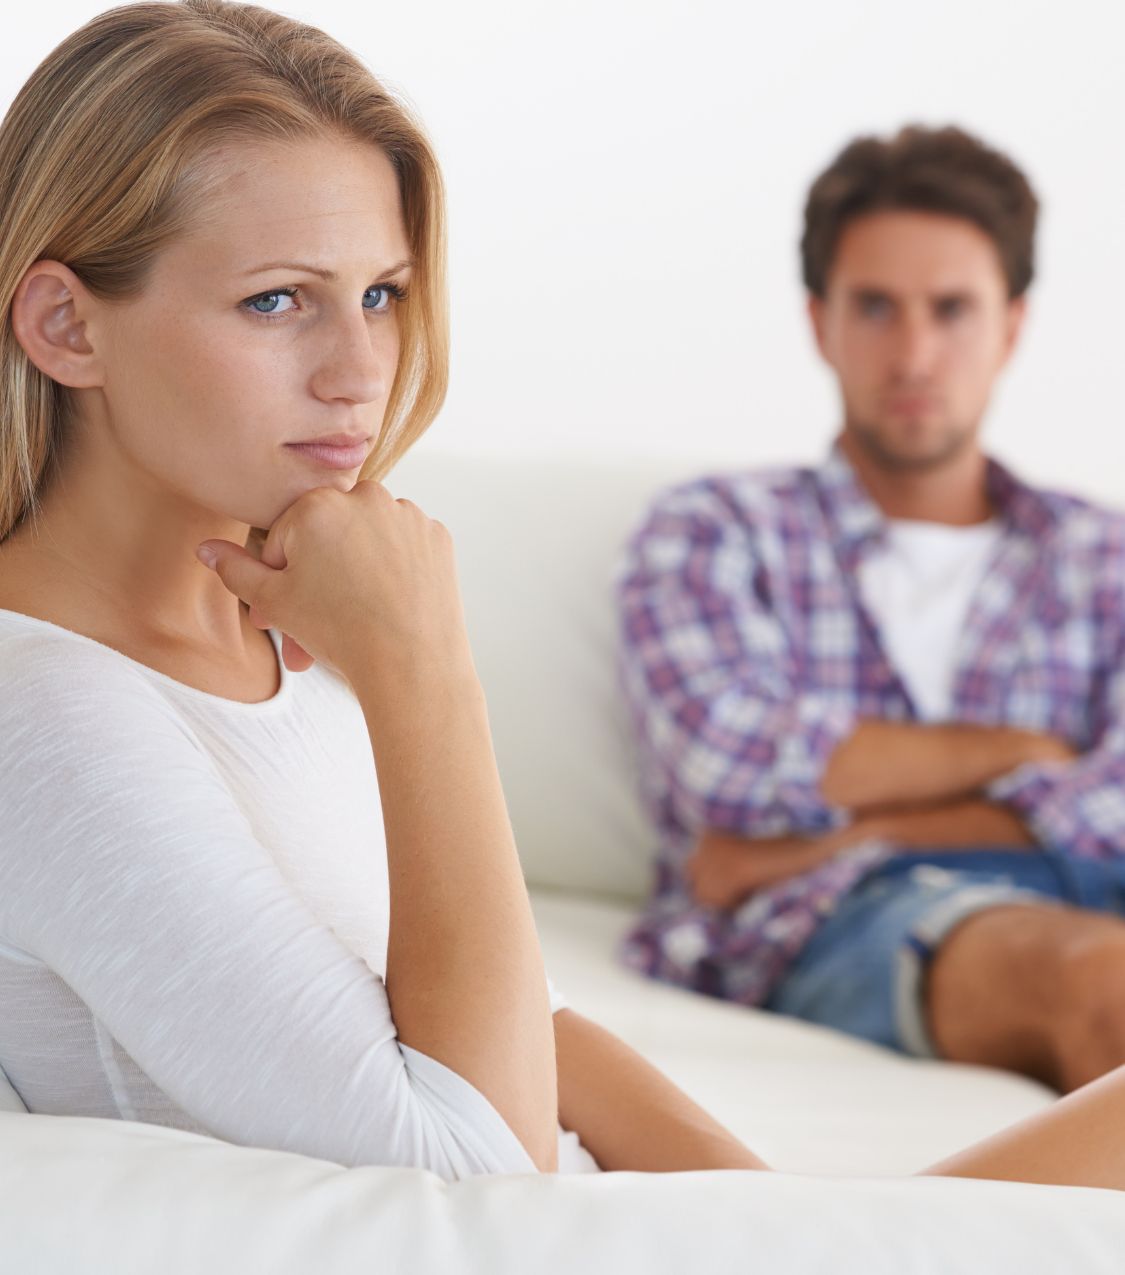 A woman gazes ahead, distancing herself from a blurred man figure behind her, depicting the aftermath of infidelity. Unsure how to apologize for cheating, we help couples nationwide, including California, Ohio, New York, Florida, and Colorado in the USA, as well as in Canada, the UK, and Australia. Book a consultation with us today!